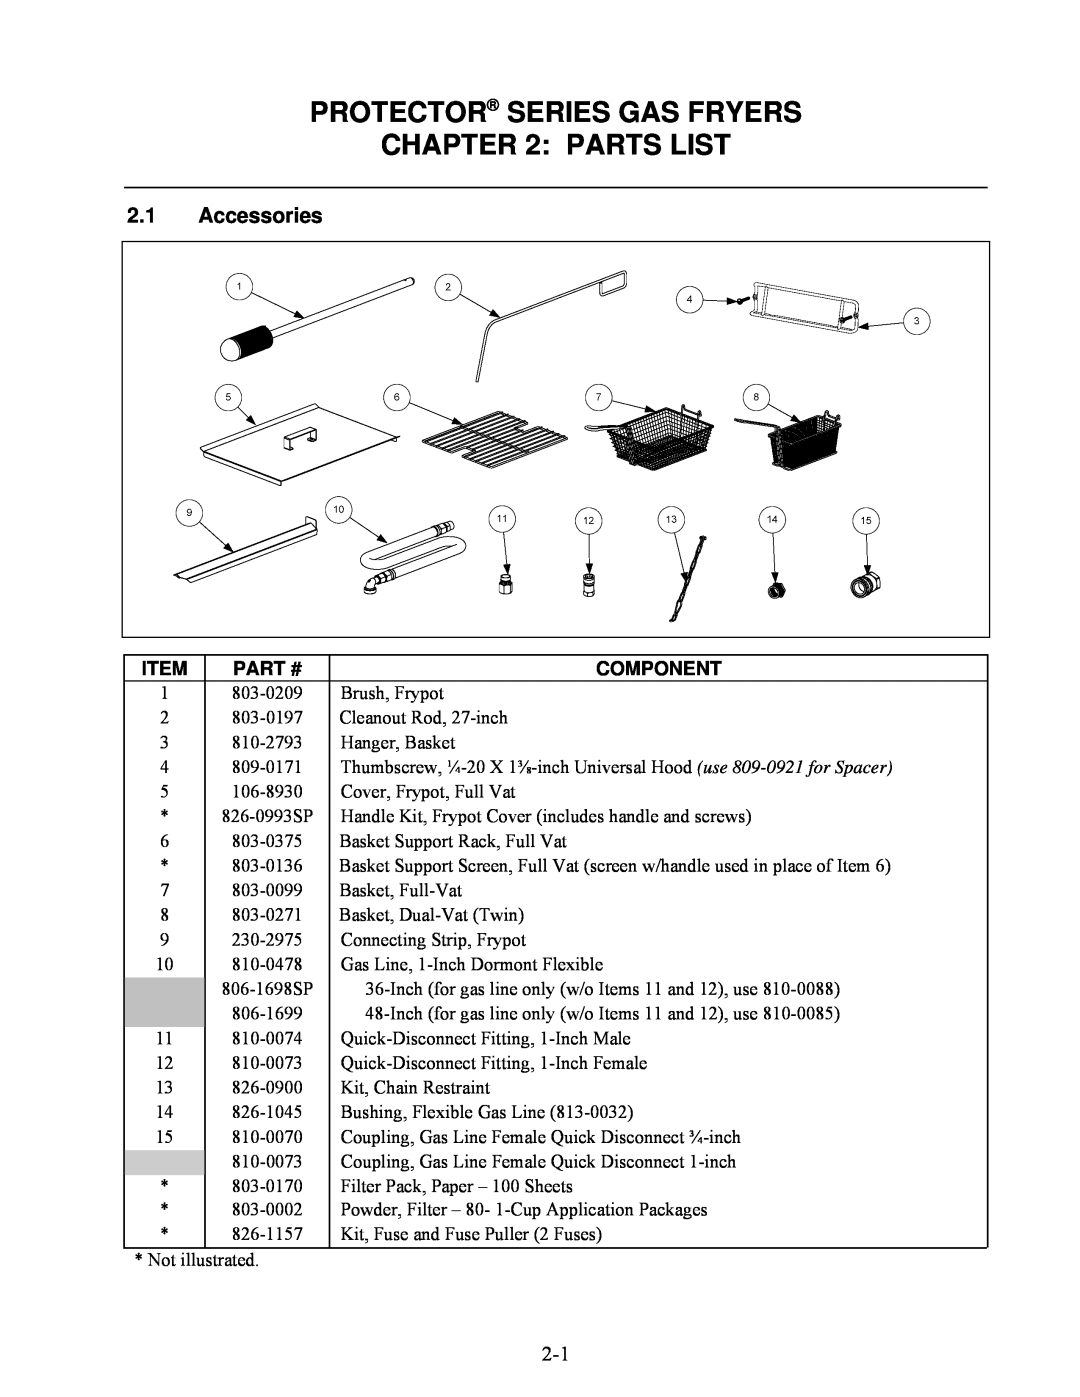 Frymaster 8196345 manual Protector Series Gas Fryers Parts List, Accessories, Component 